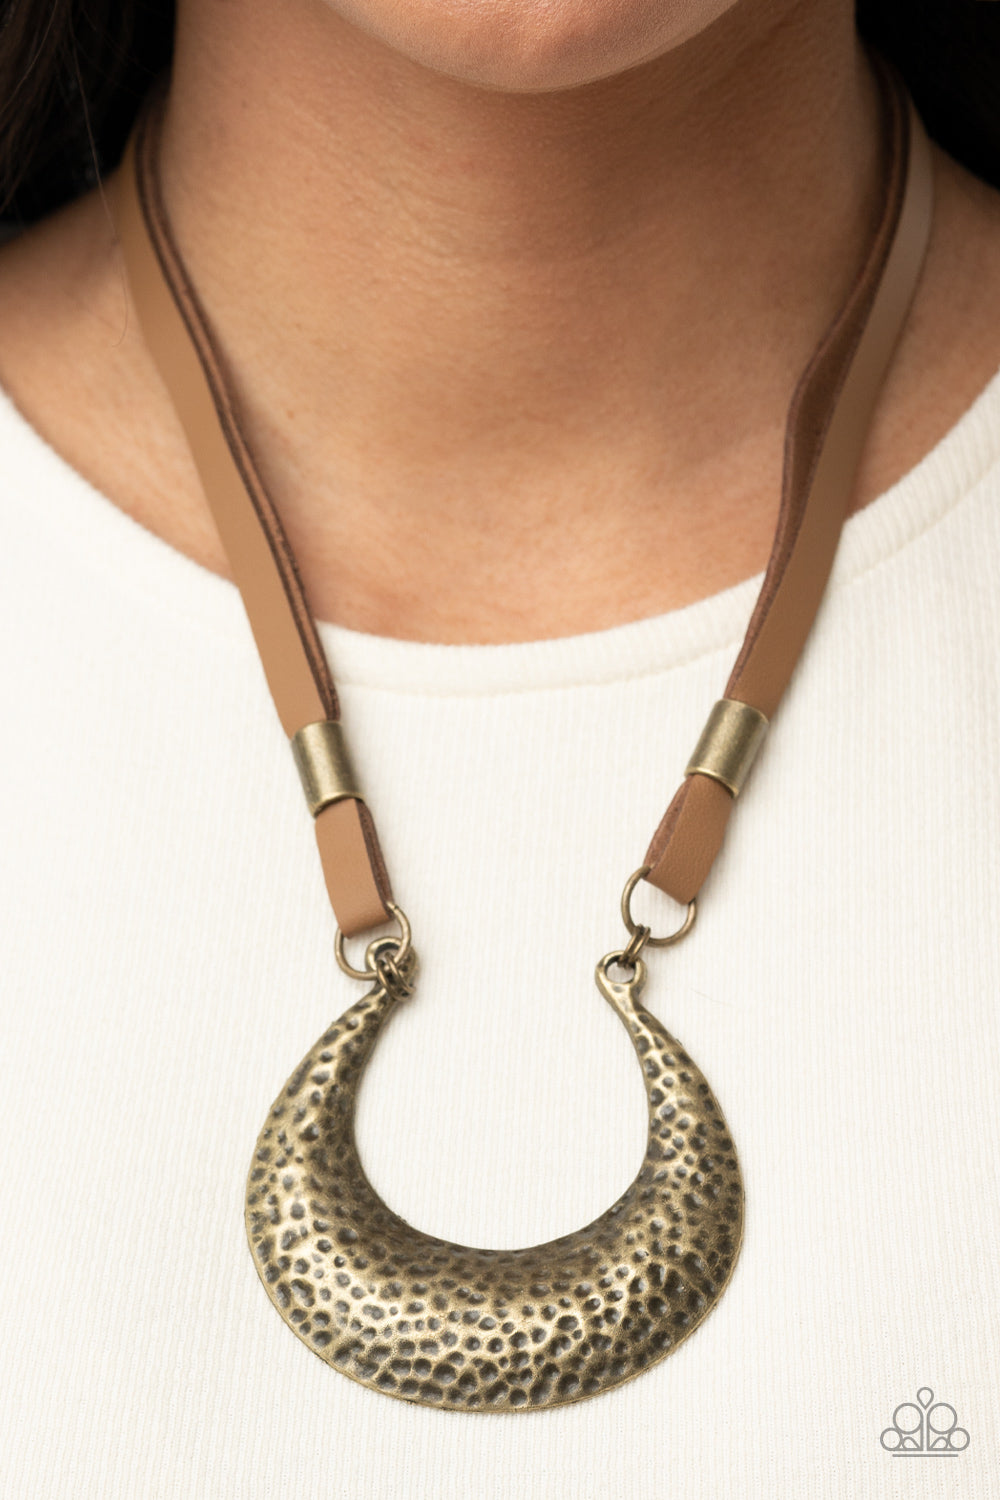 Majorly Moonstruck Brass Necklace - Paparazzi Accessories  Infused with antiqued brass beads, strips of brown leather link to an oversized half moon pendant that is hammered in a bold brass finish, creating a rustic statement piece below the collar. Features an adjustable clasp closure.  All Paparazzi Accessories are lead free and nickel free!  Sold as one individual necklace. Includes one pair of matching earrings.